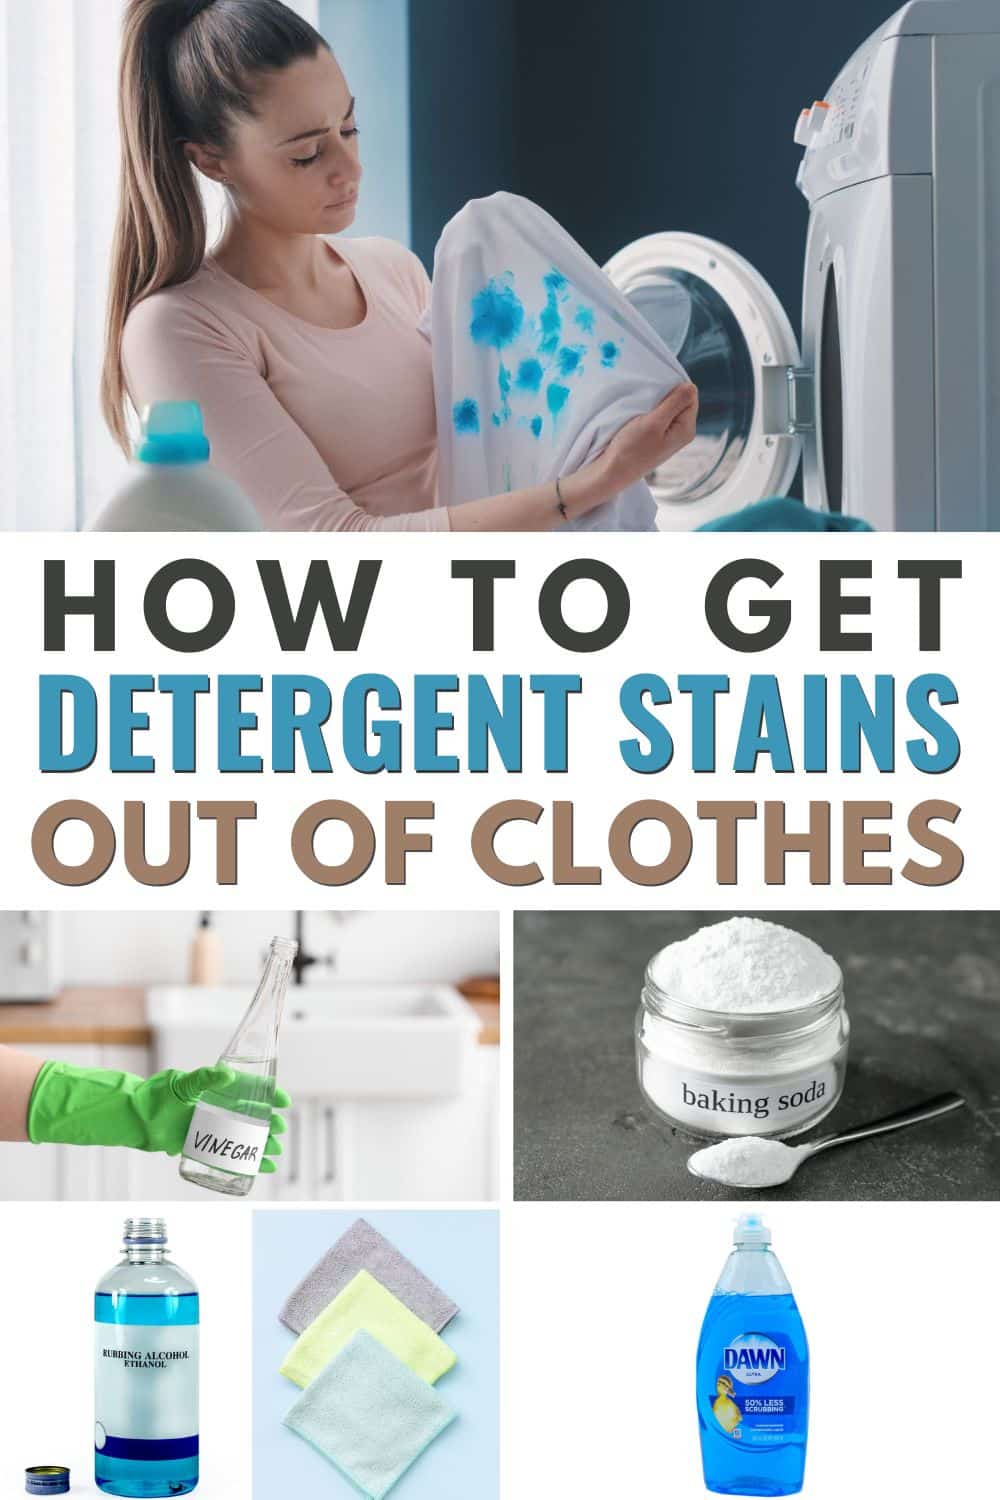 Learn effective ways to remove detergent stains from your clothes.